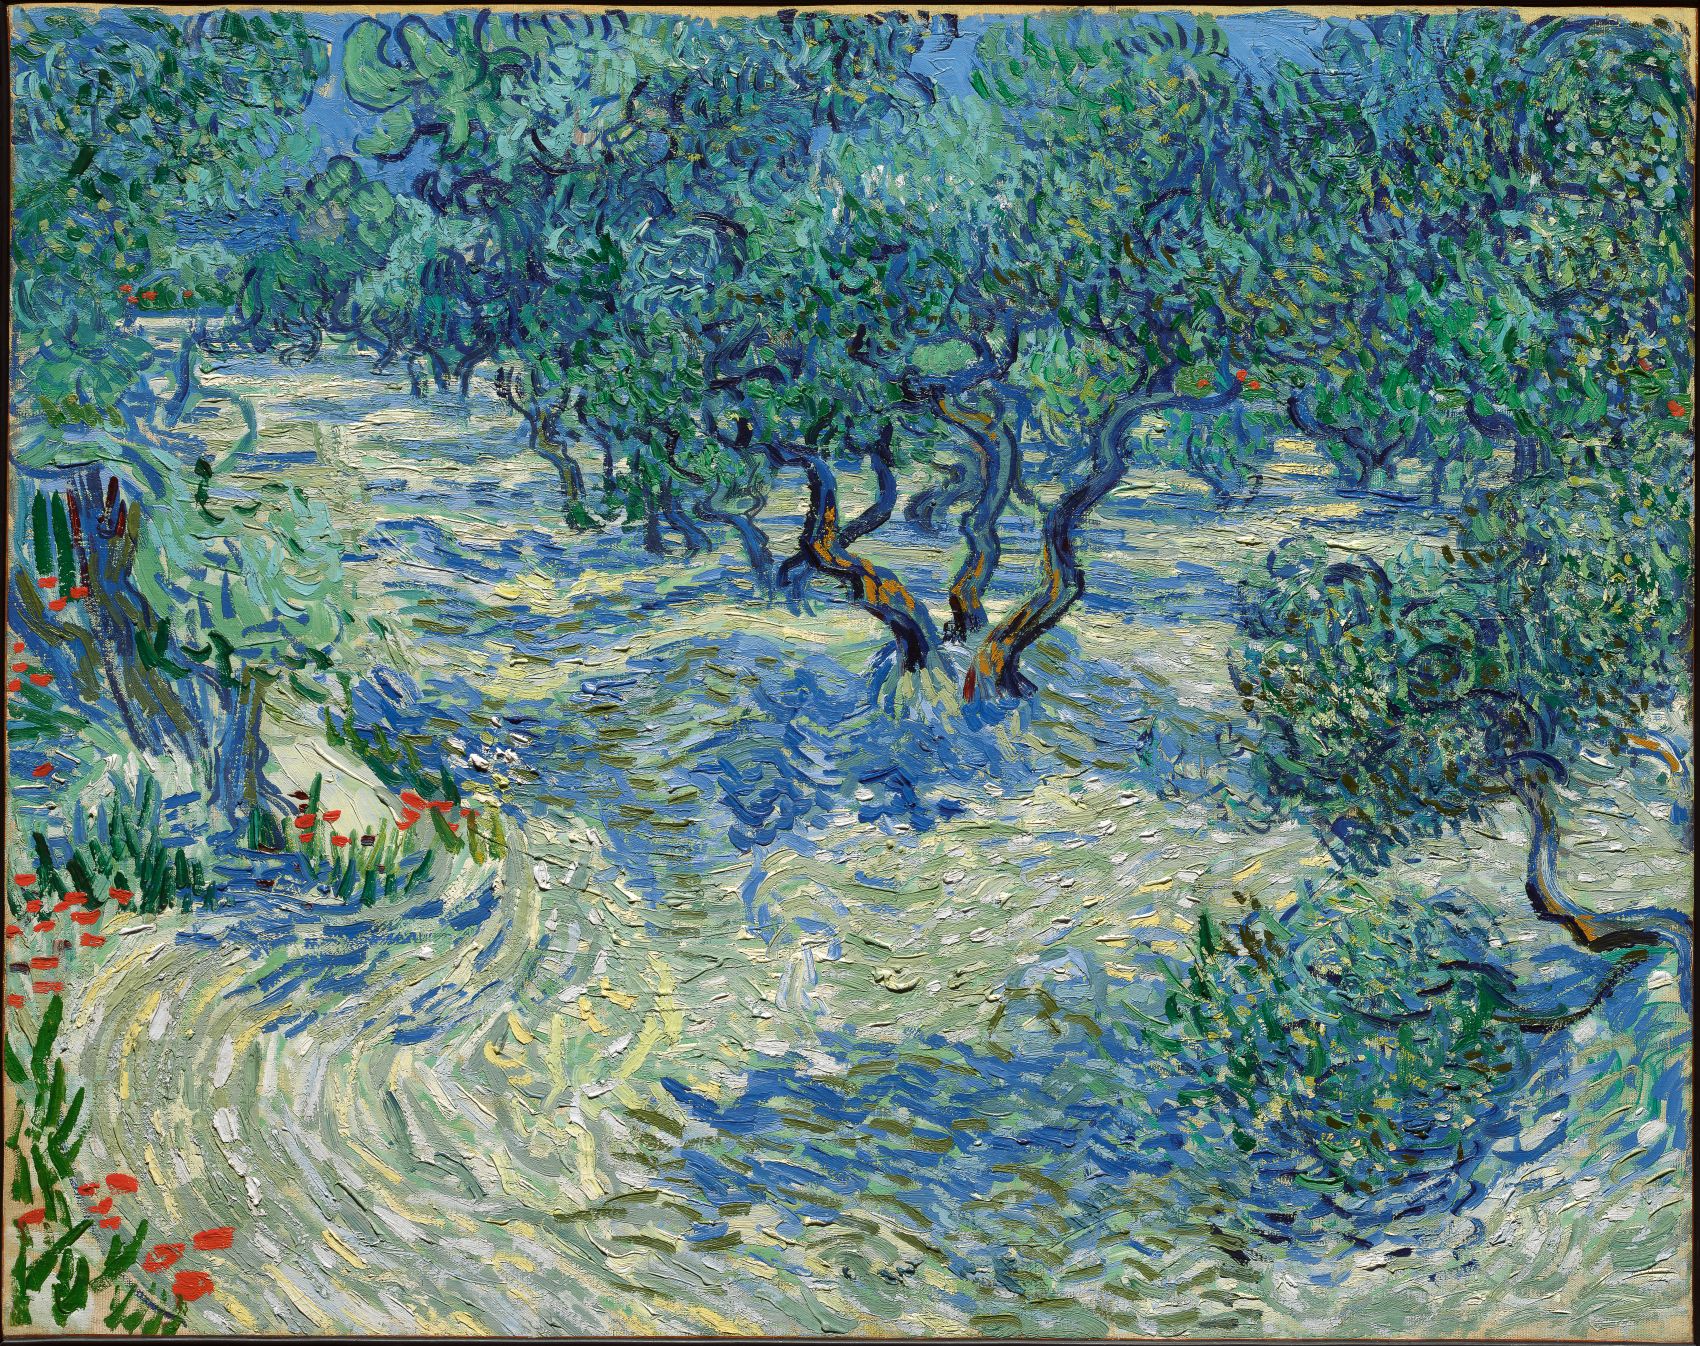 Olivos by Vincent van Gogh - 1889 - 73,2 × 92,2 cm Museo Nelson-Atkins